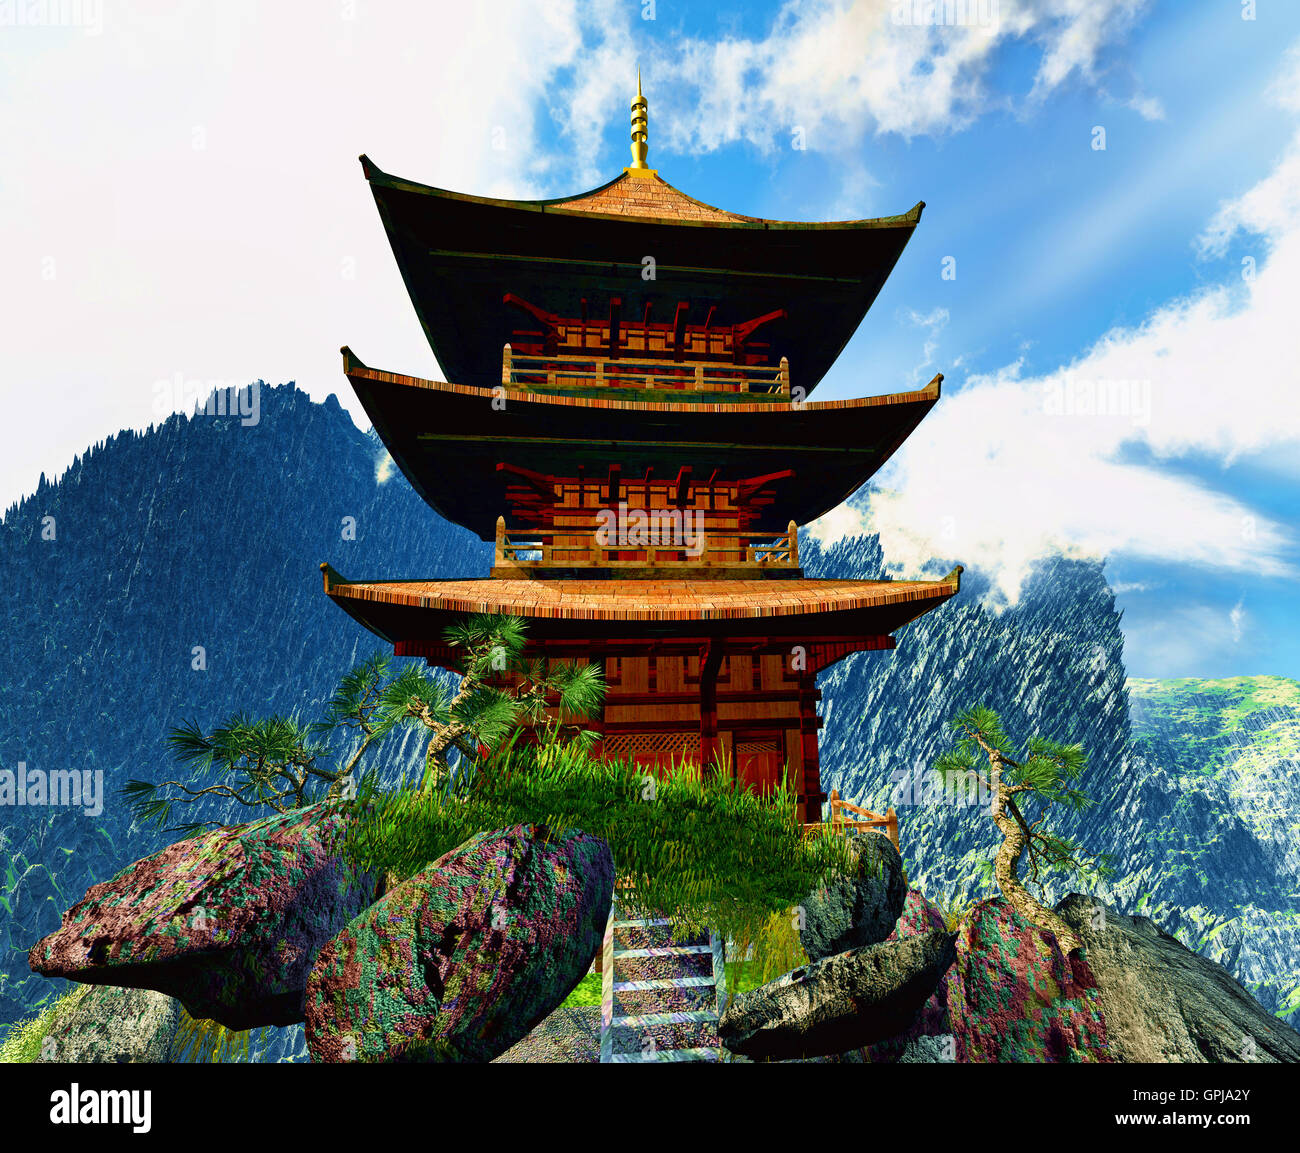 Buddhist temple in mountains Stock Photo